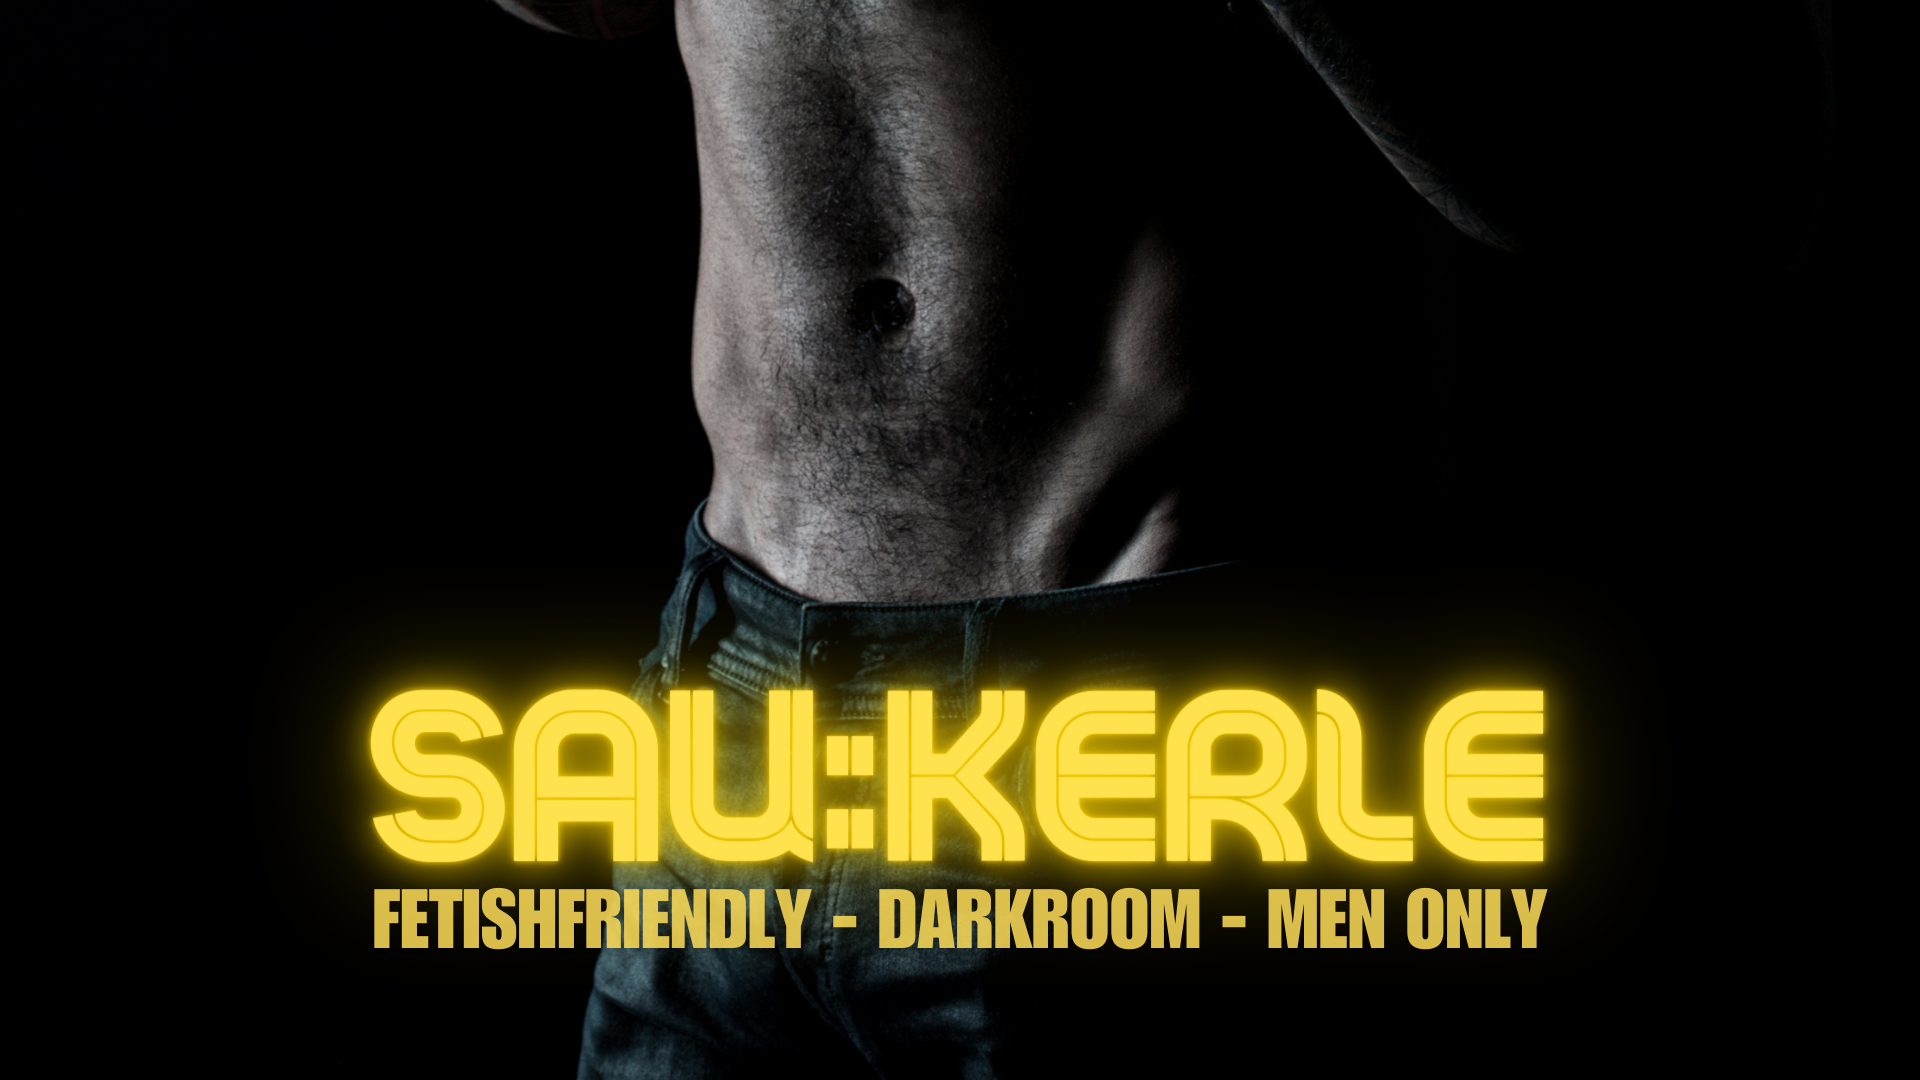 SAUKERLE Party Hannover only for men